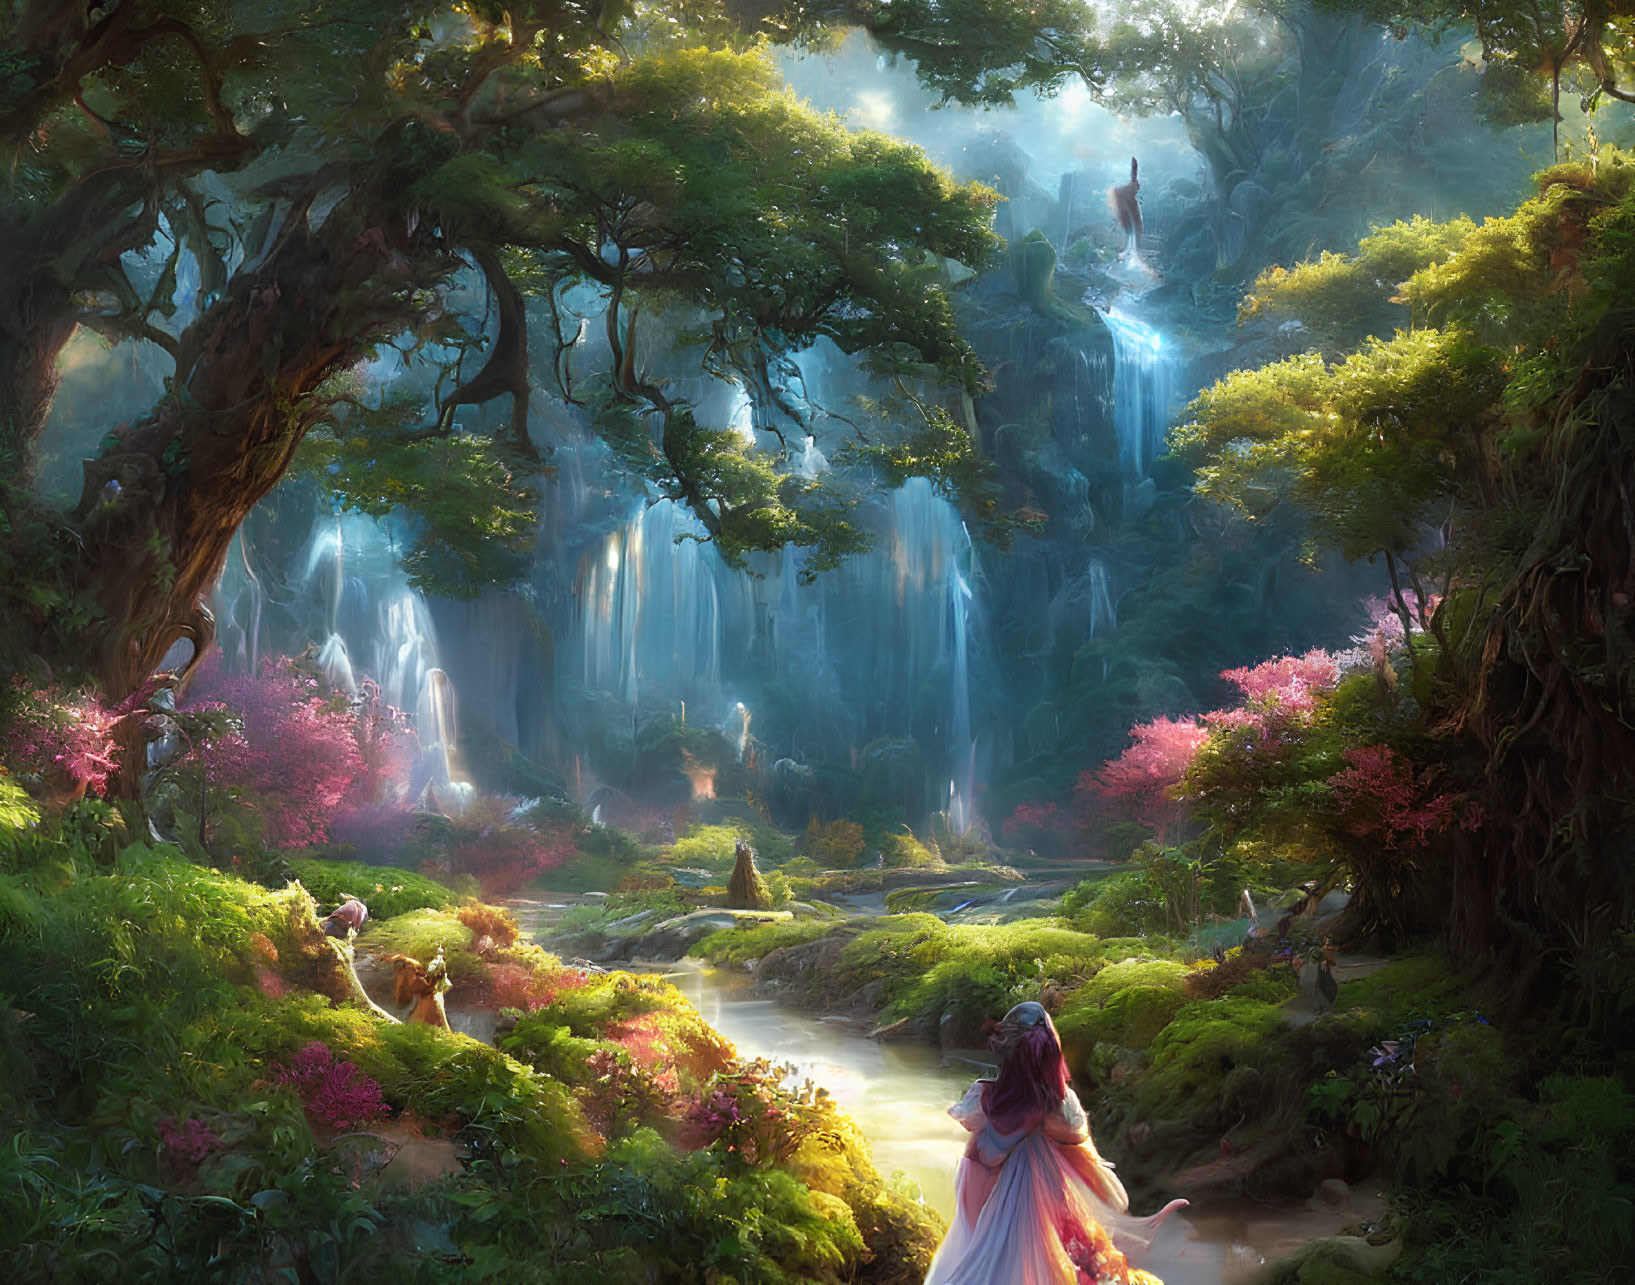 Magical forest with greenery, waterfalls, stream, vibrant flora, figure in pink cloak